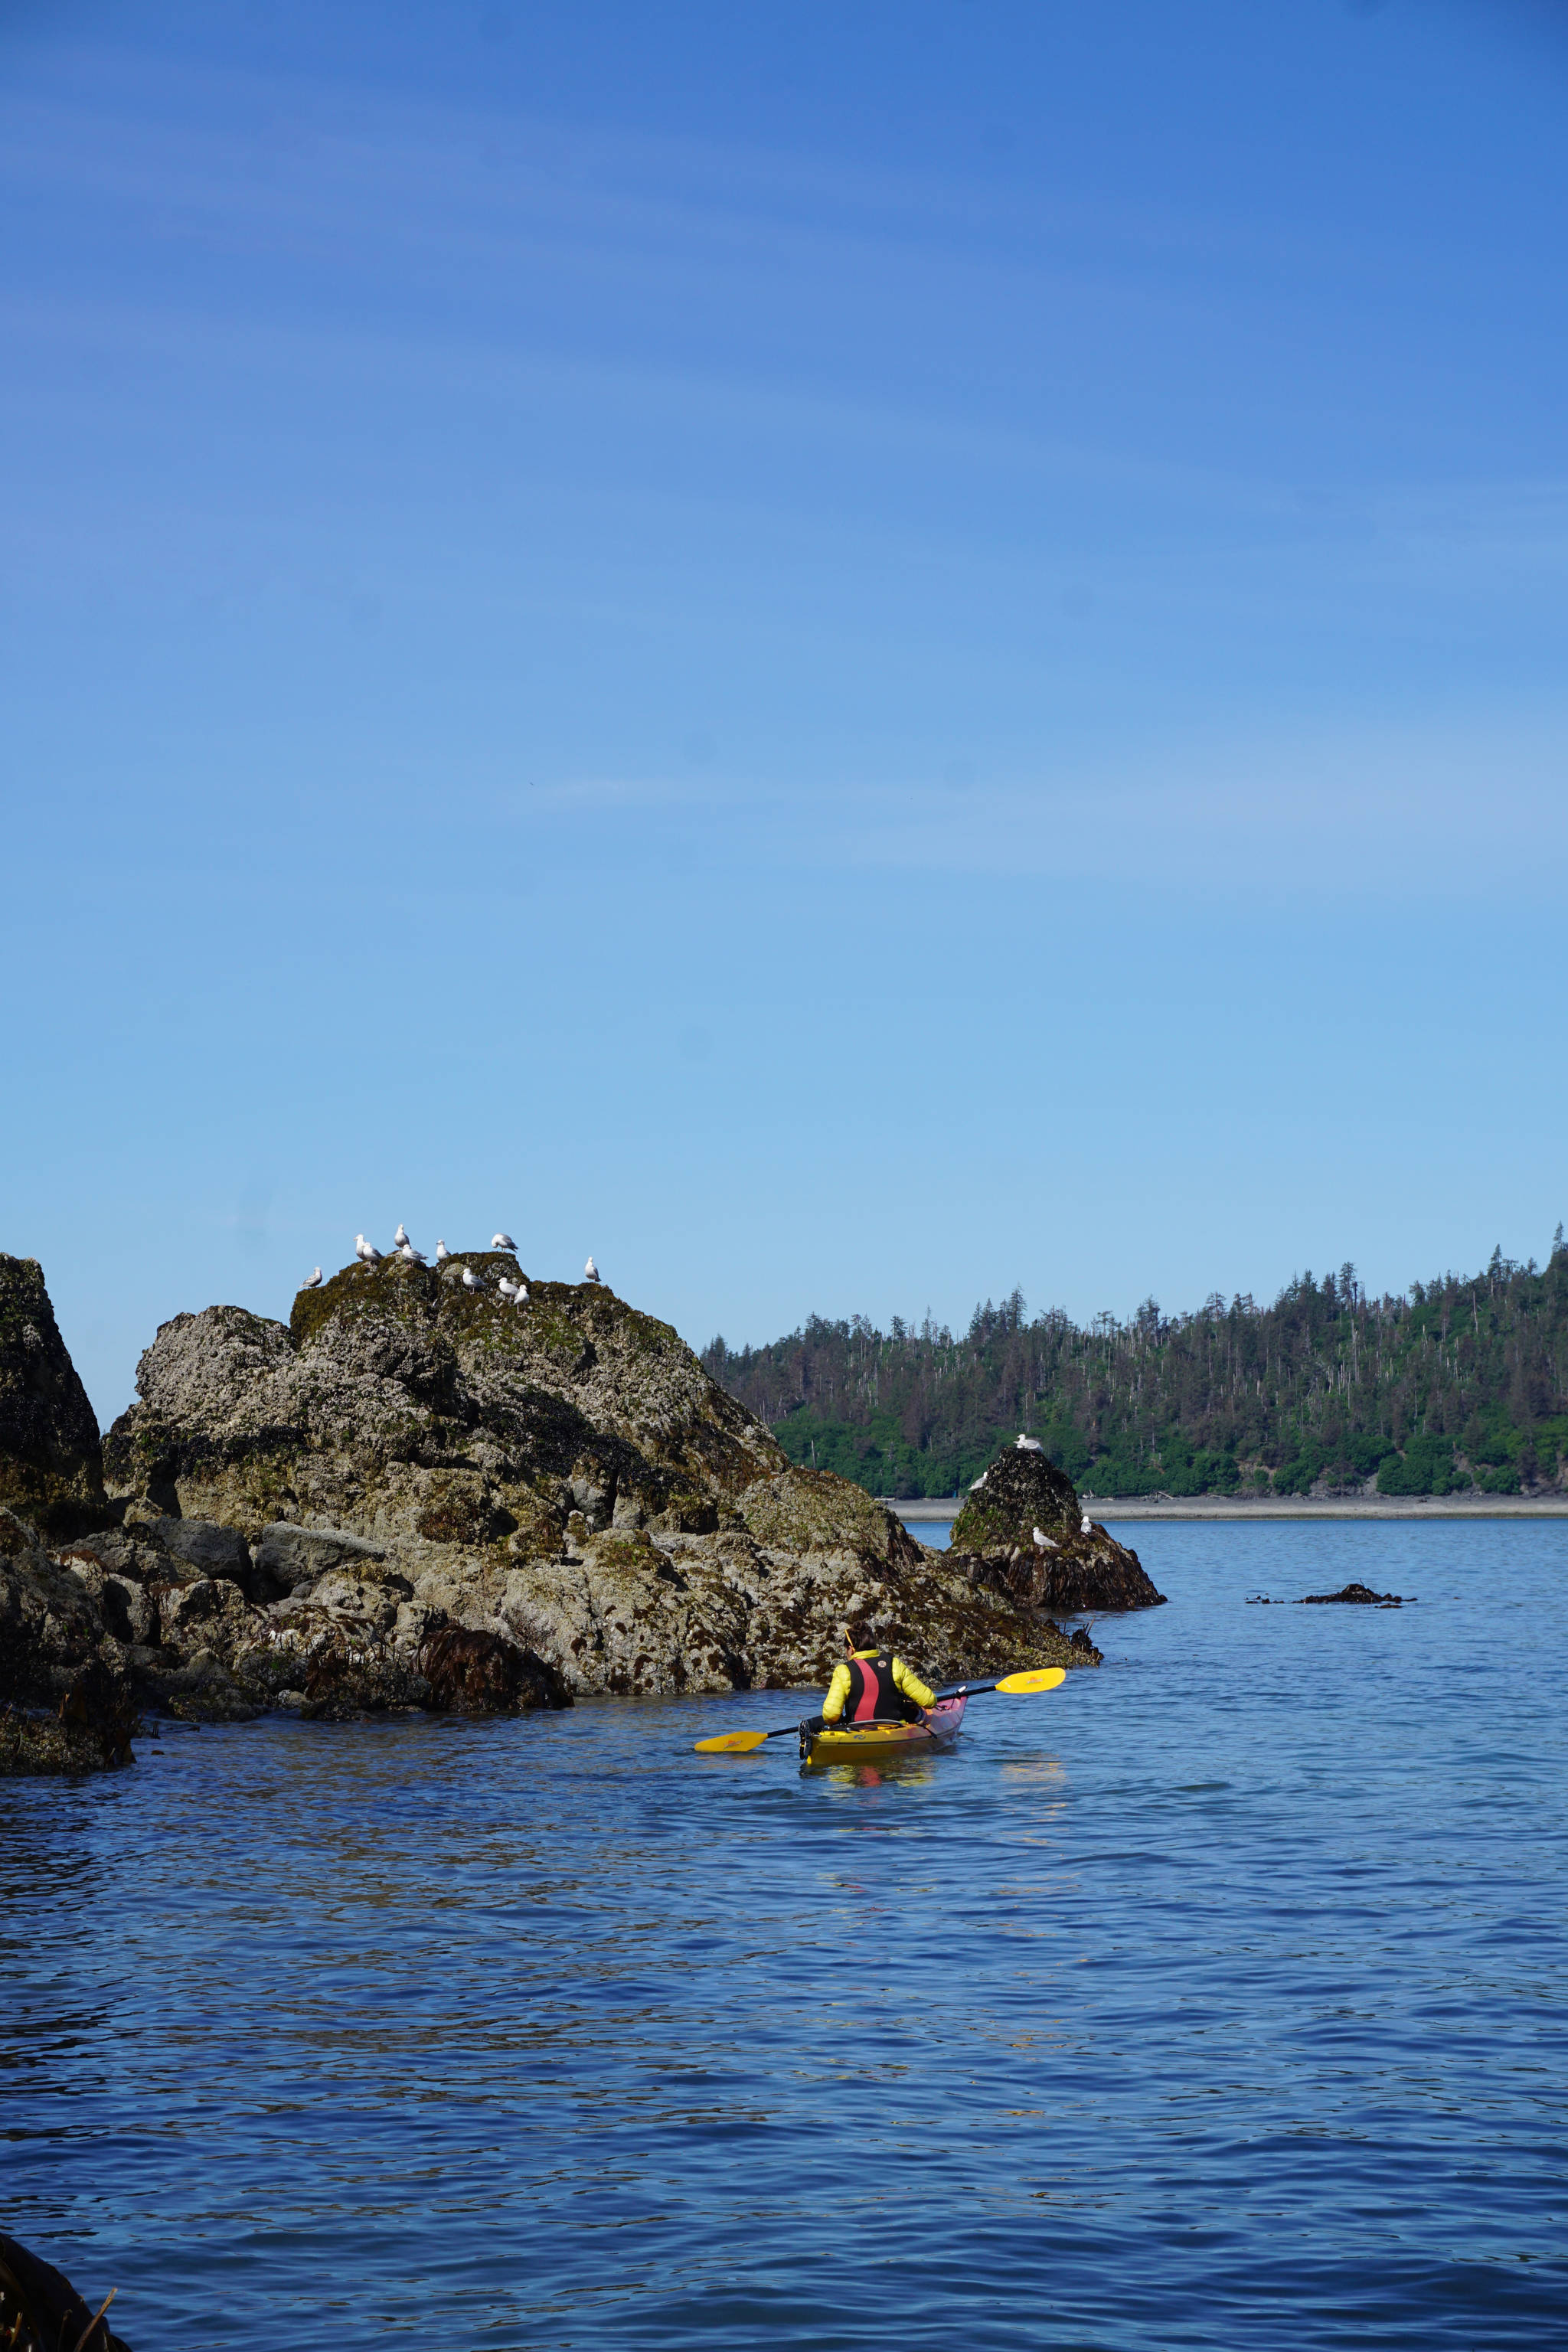 Photo by Michael Armstrong/Homer News Brittany Nathat kayaks by rocks at low tide near Otter Cove Resort in Kachemak Bay on Sunday, June 25. Nathat is a kayak guide at the resort.